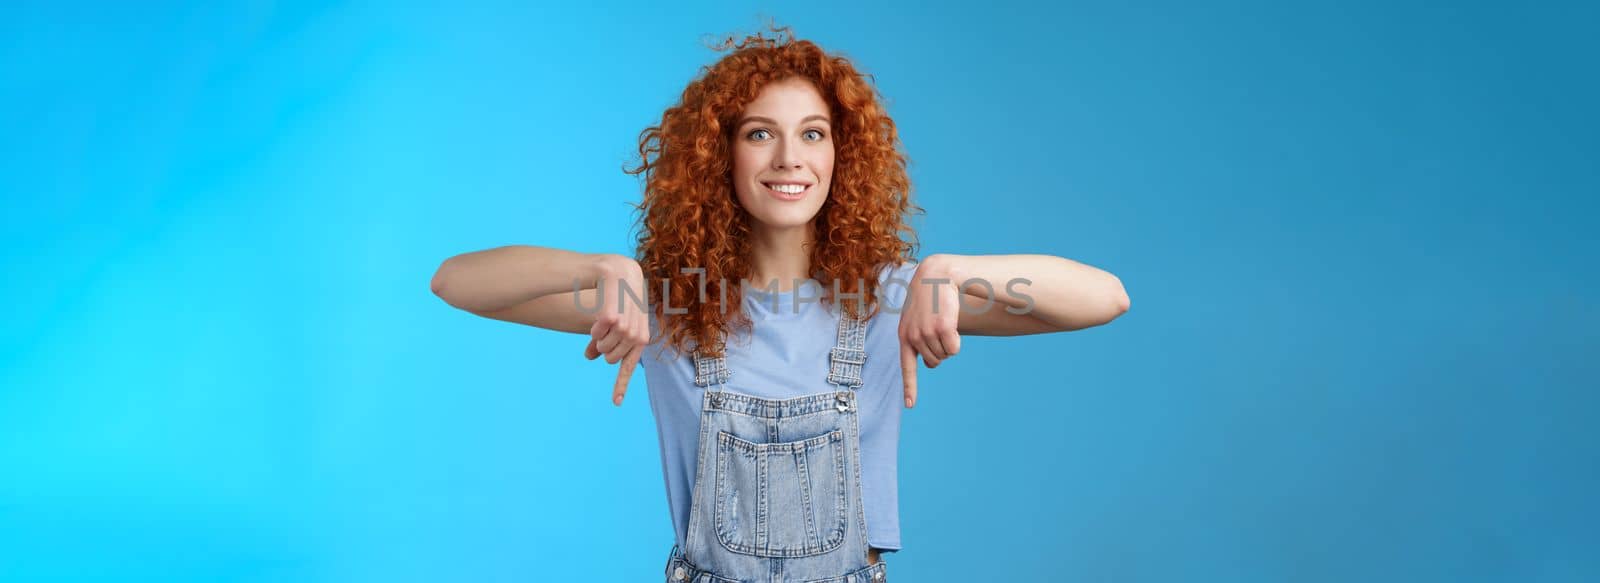 Excited happy smiling caring redhead curly-haired girlfriend thrilled awaiting summer holiday trip pointing down index finger upbeat mood show favorite store buy best prices, blue background.